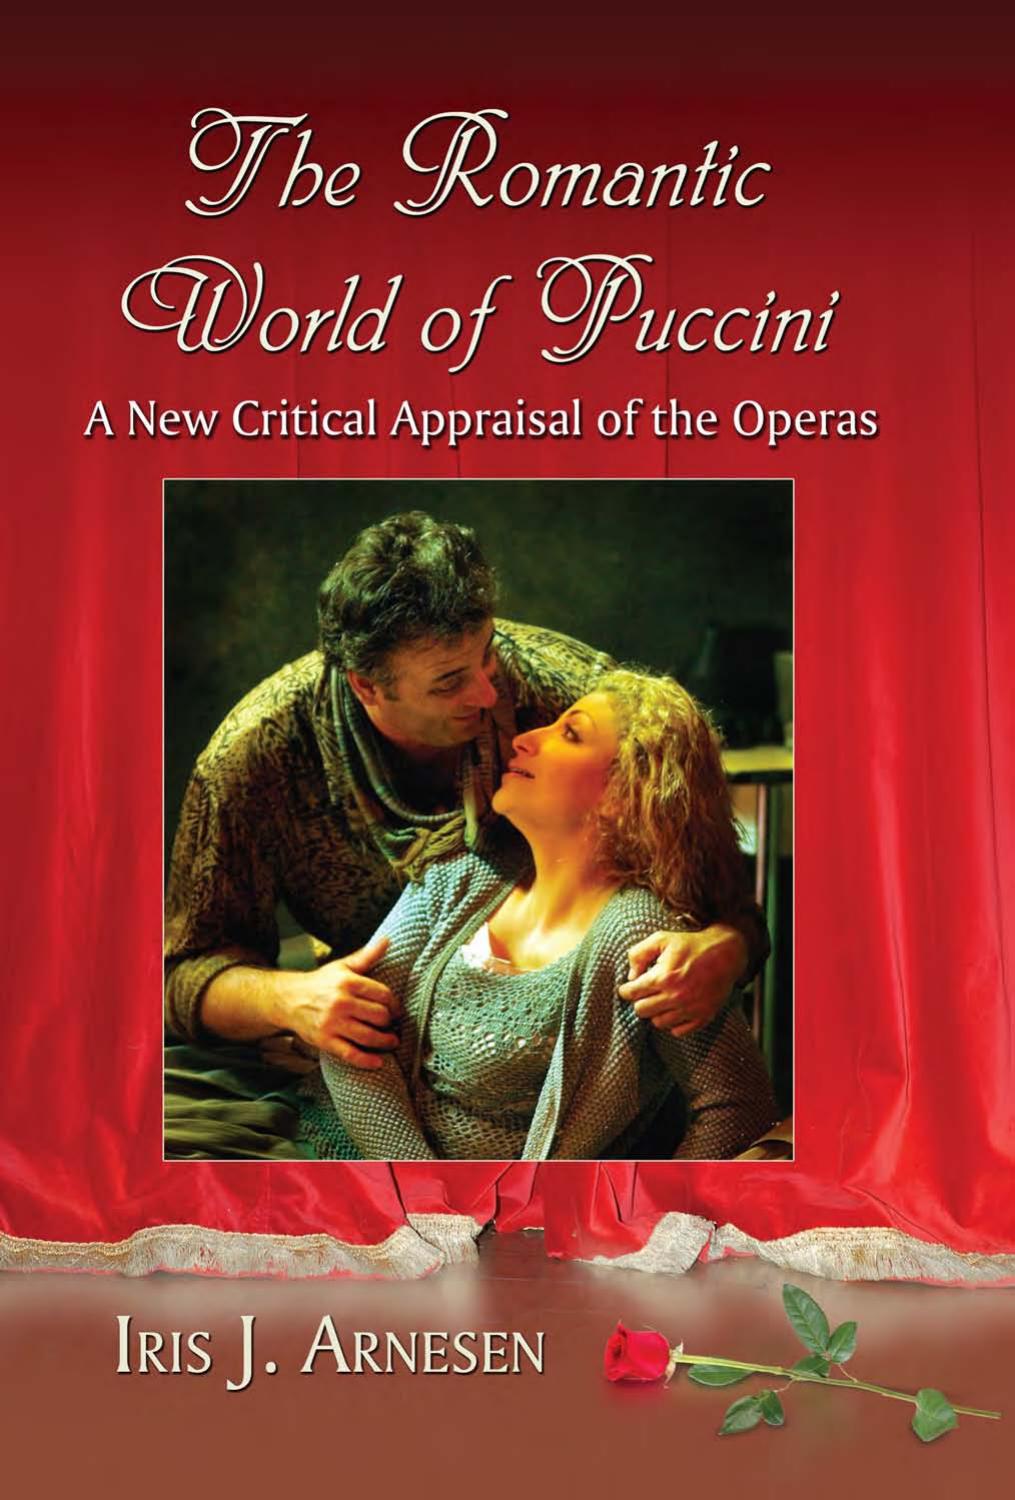 The Romantic World of Puccini: A New Critical Appraisal of the Operas by Iris J. Arnesen